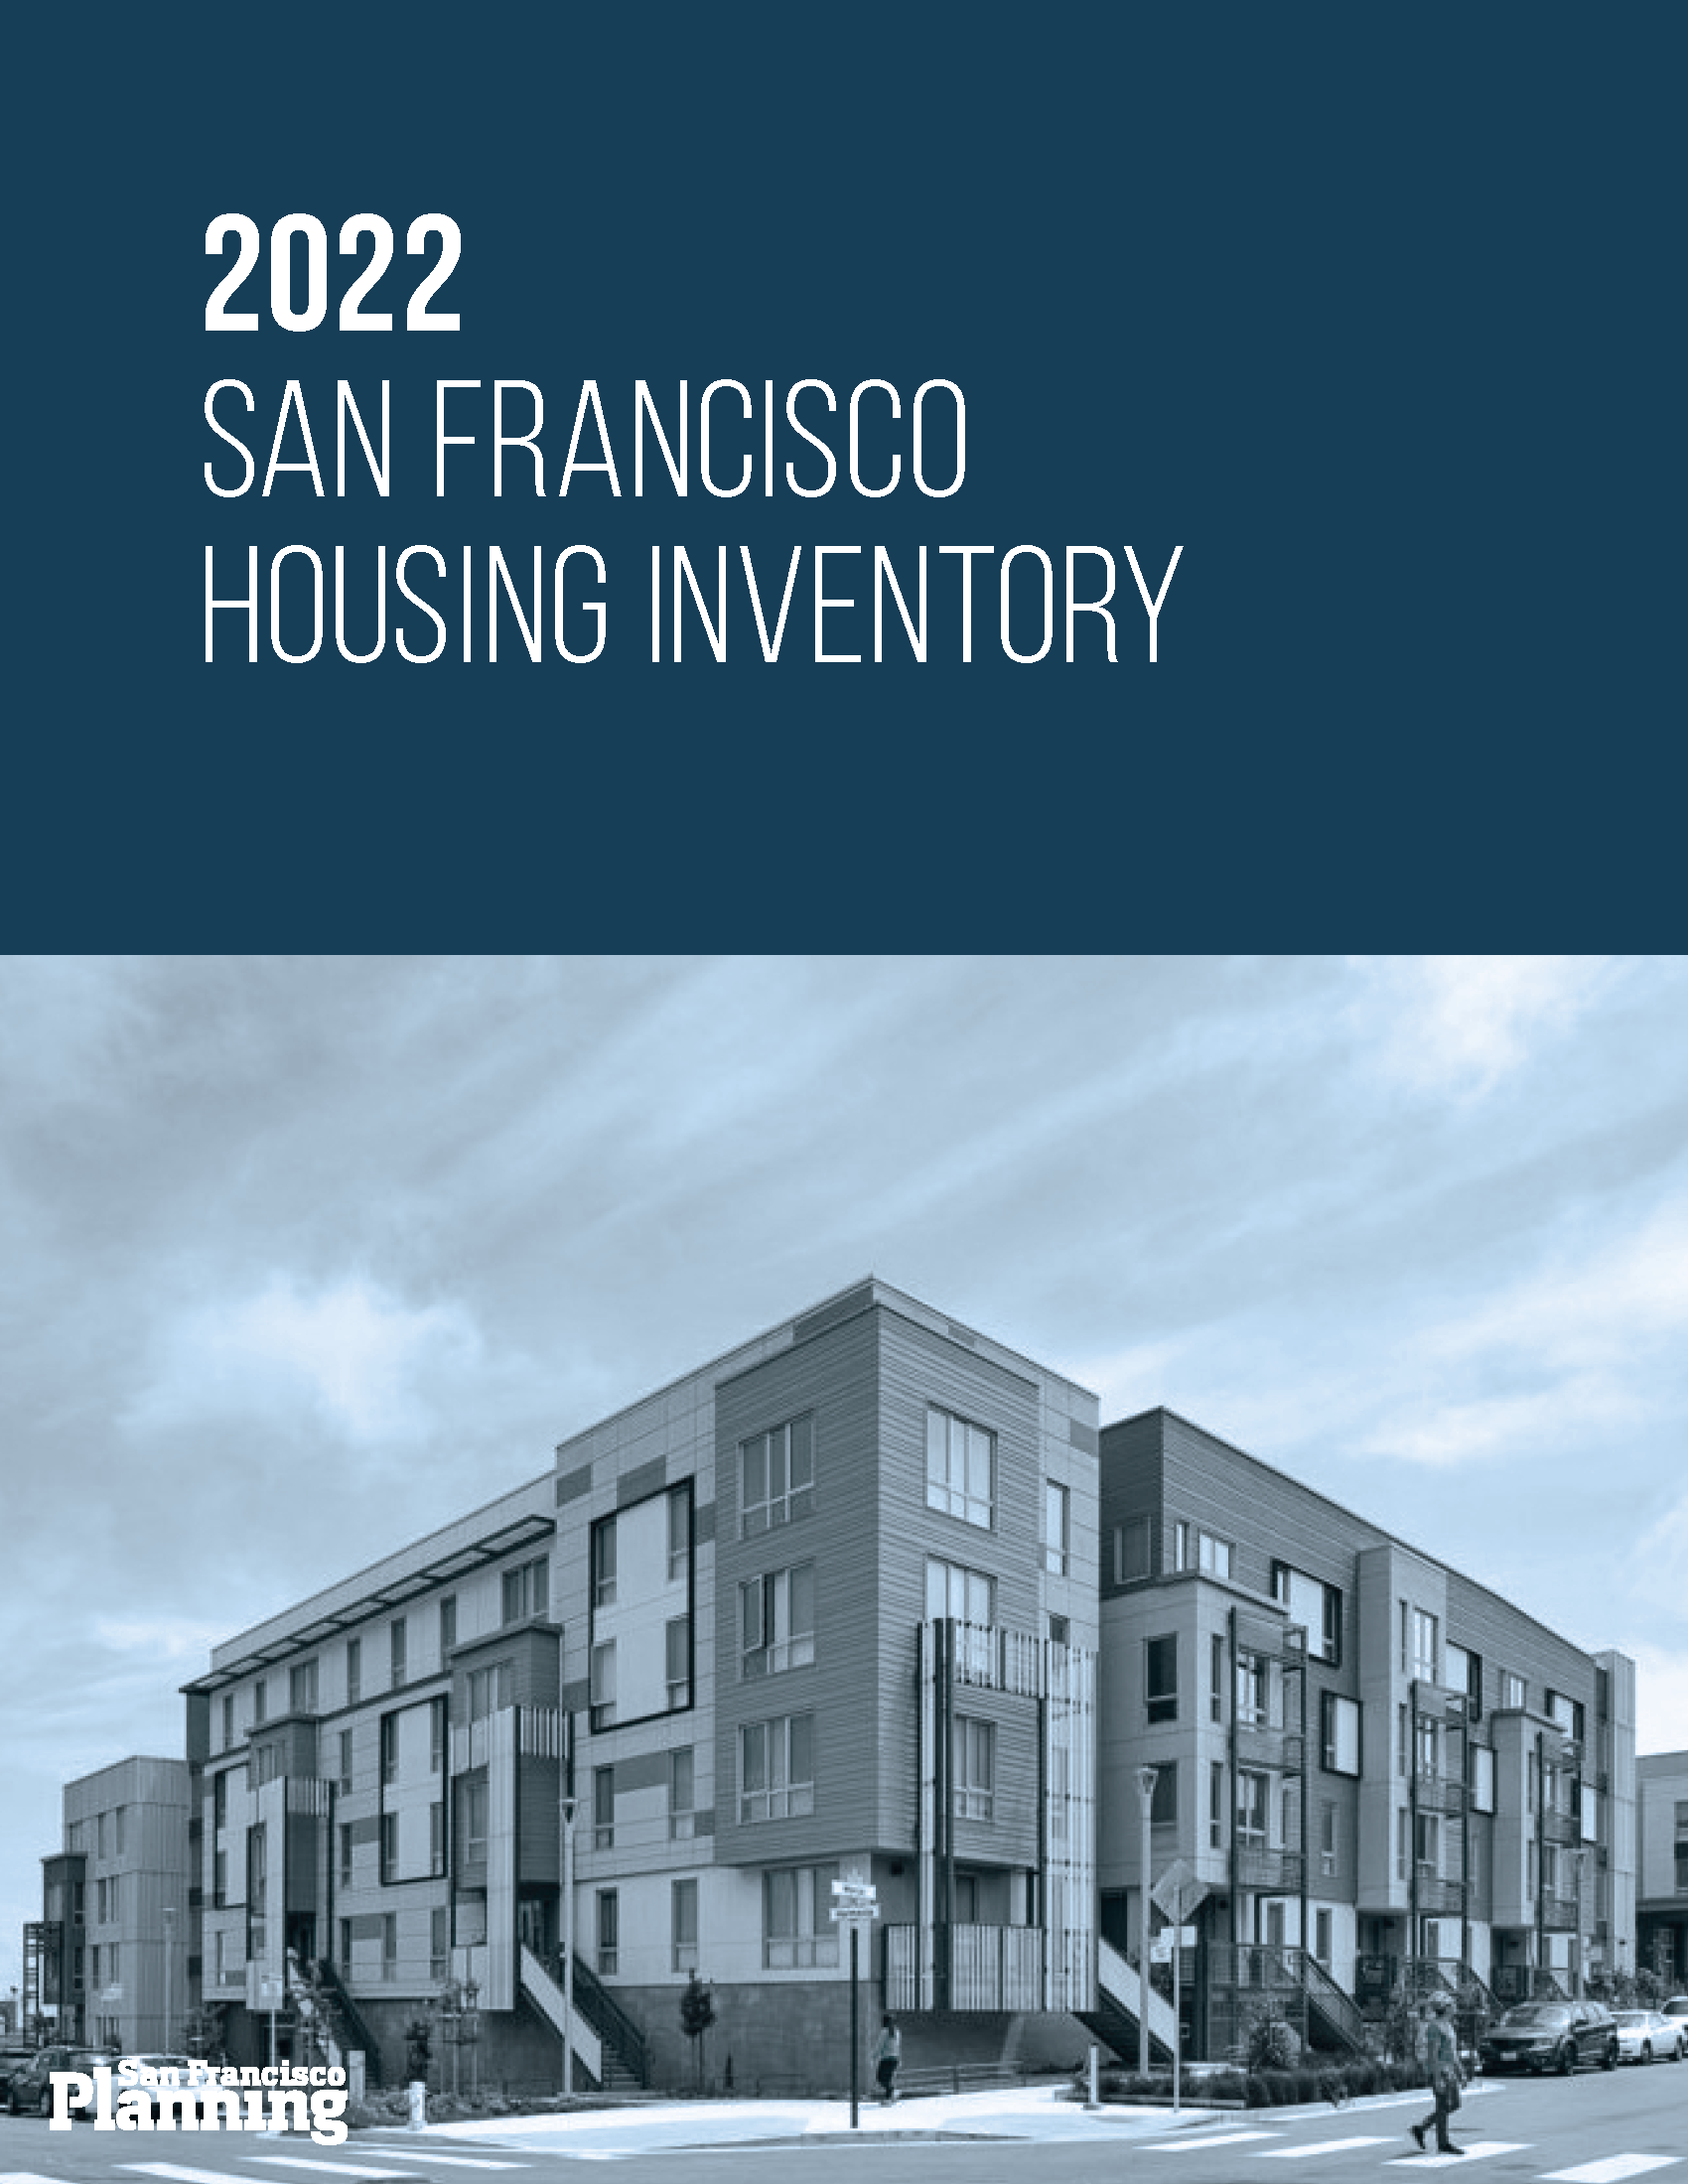 Inventory Is Key To Housing Health In 2022